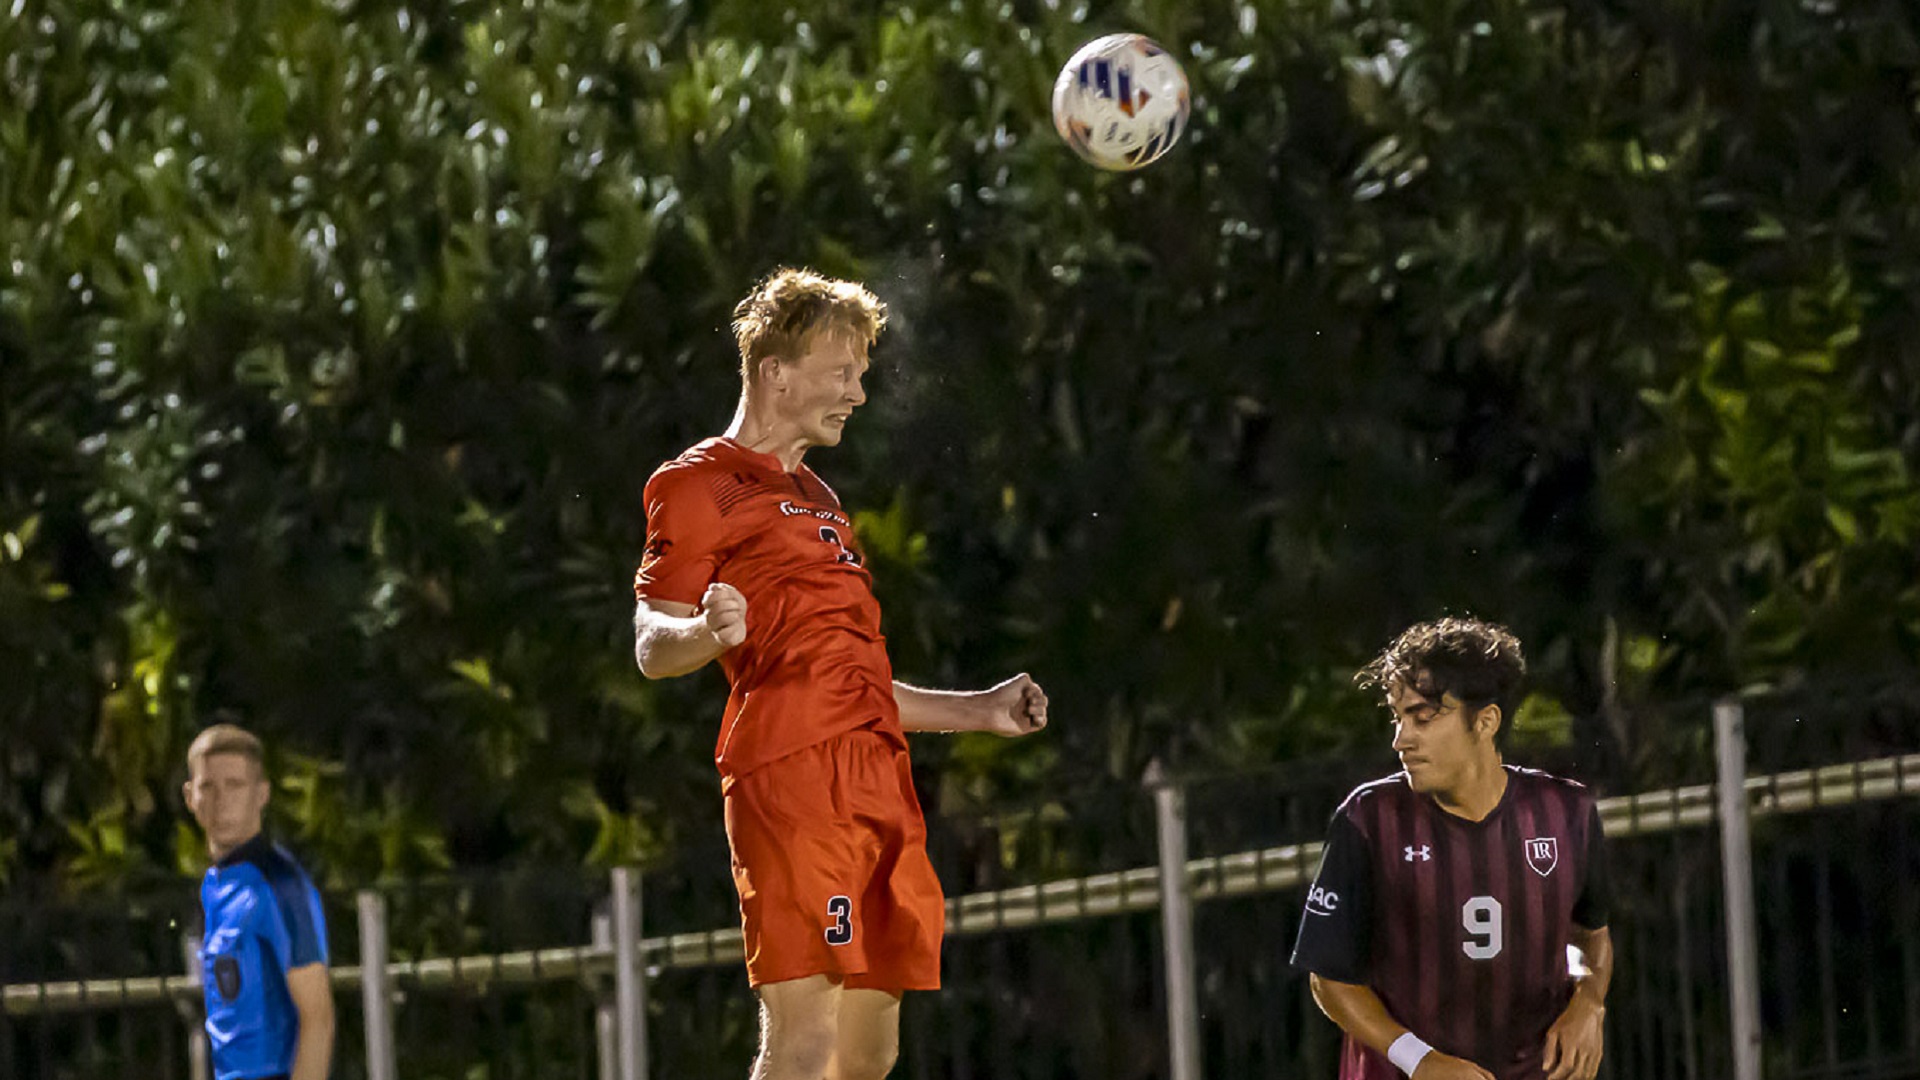 Pioneers stunned by last-minute goal, 1-0 at L-R